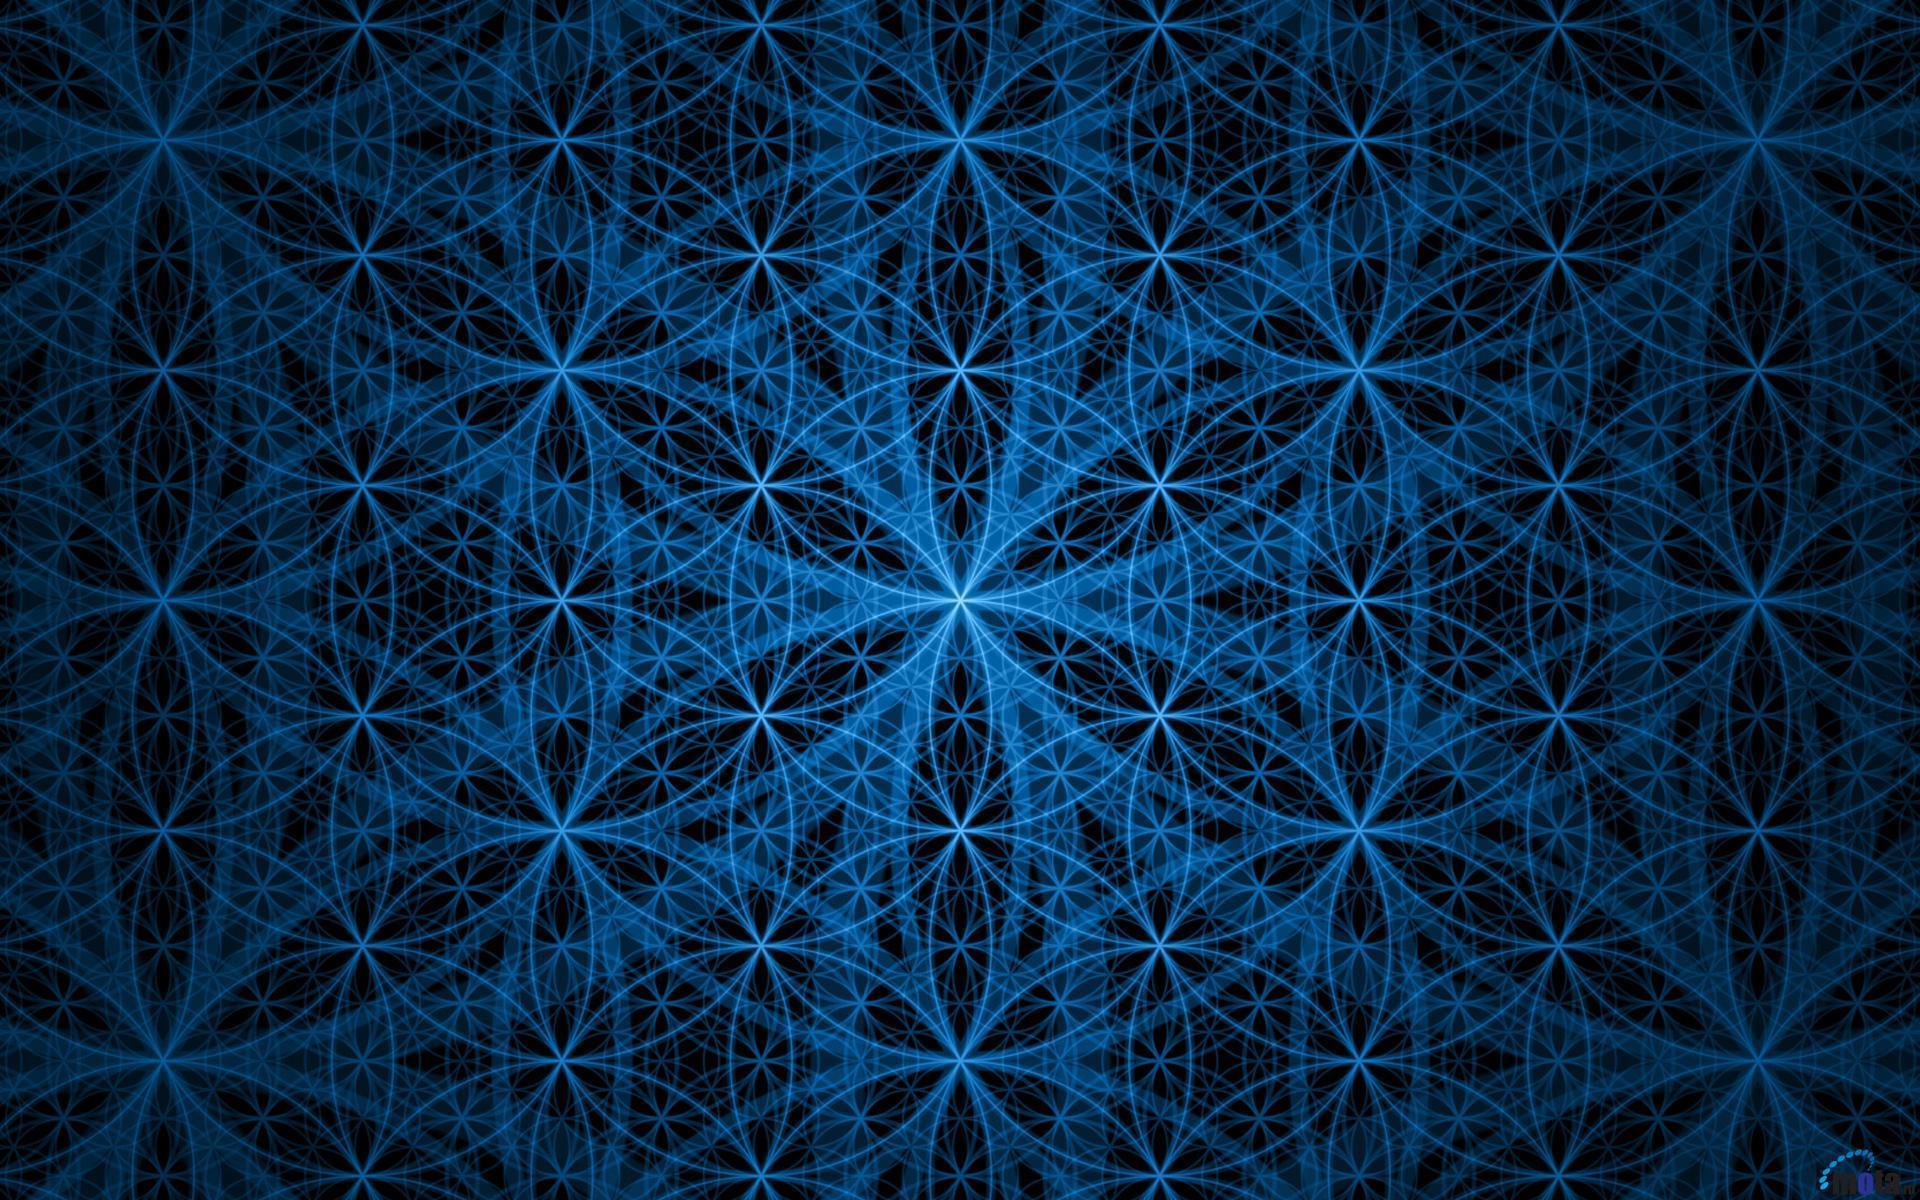 Flower Of Life Wallpapers Wallpaper Cave Try these tips to expand your search flower of life wallpapers wallpaper cave